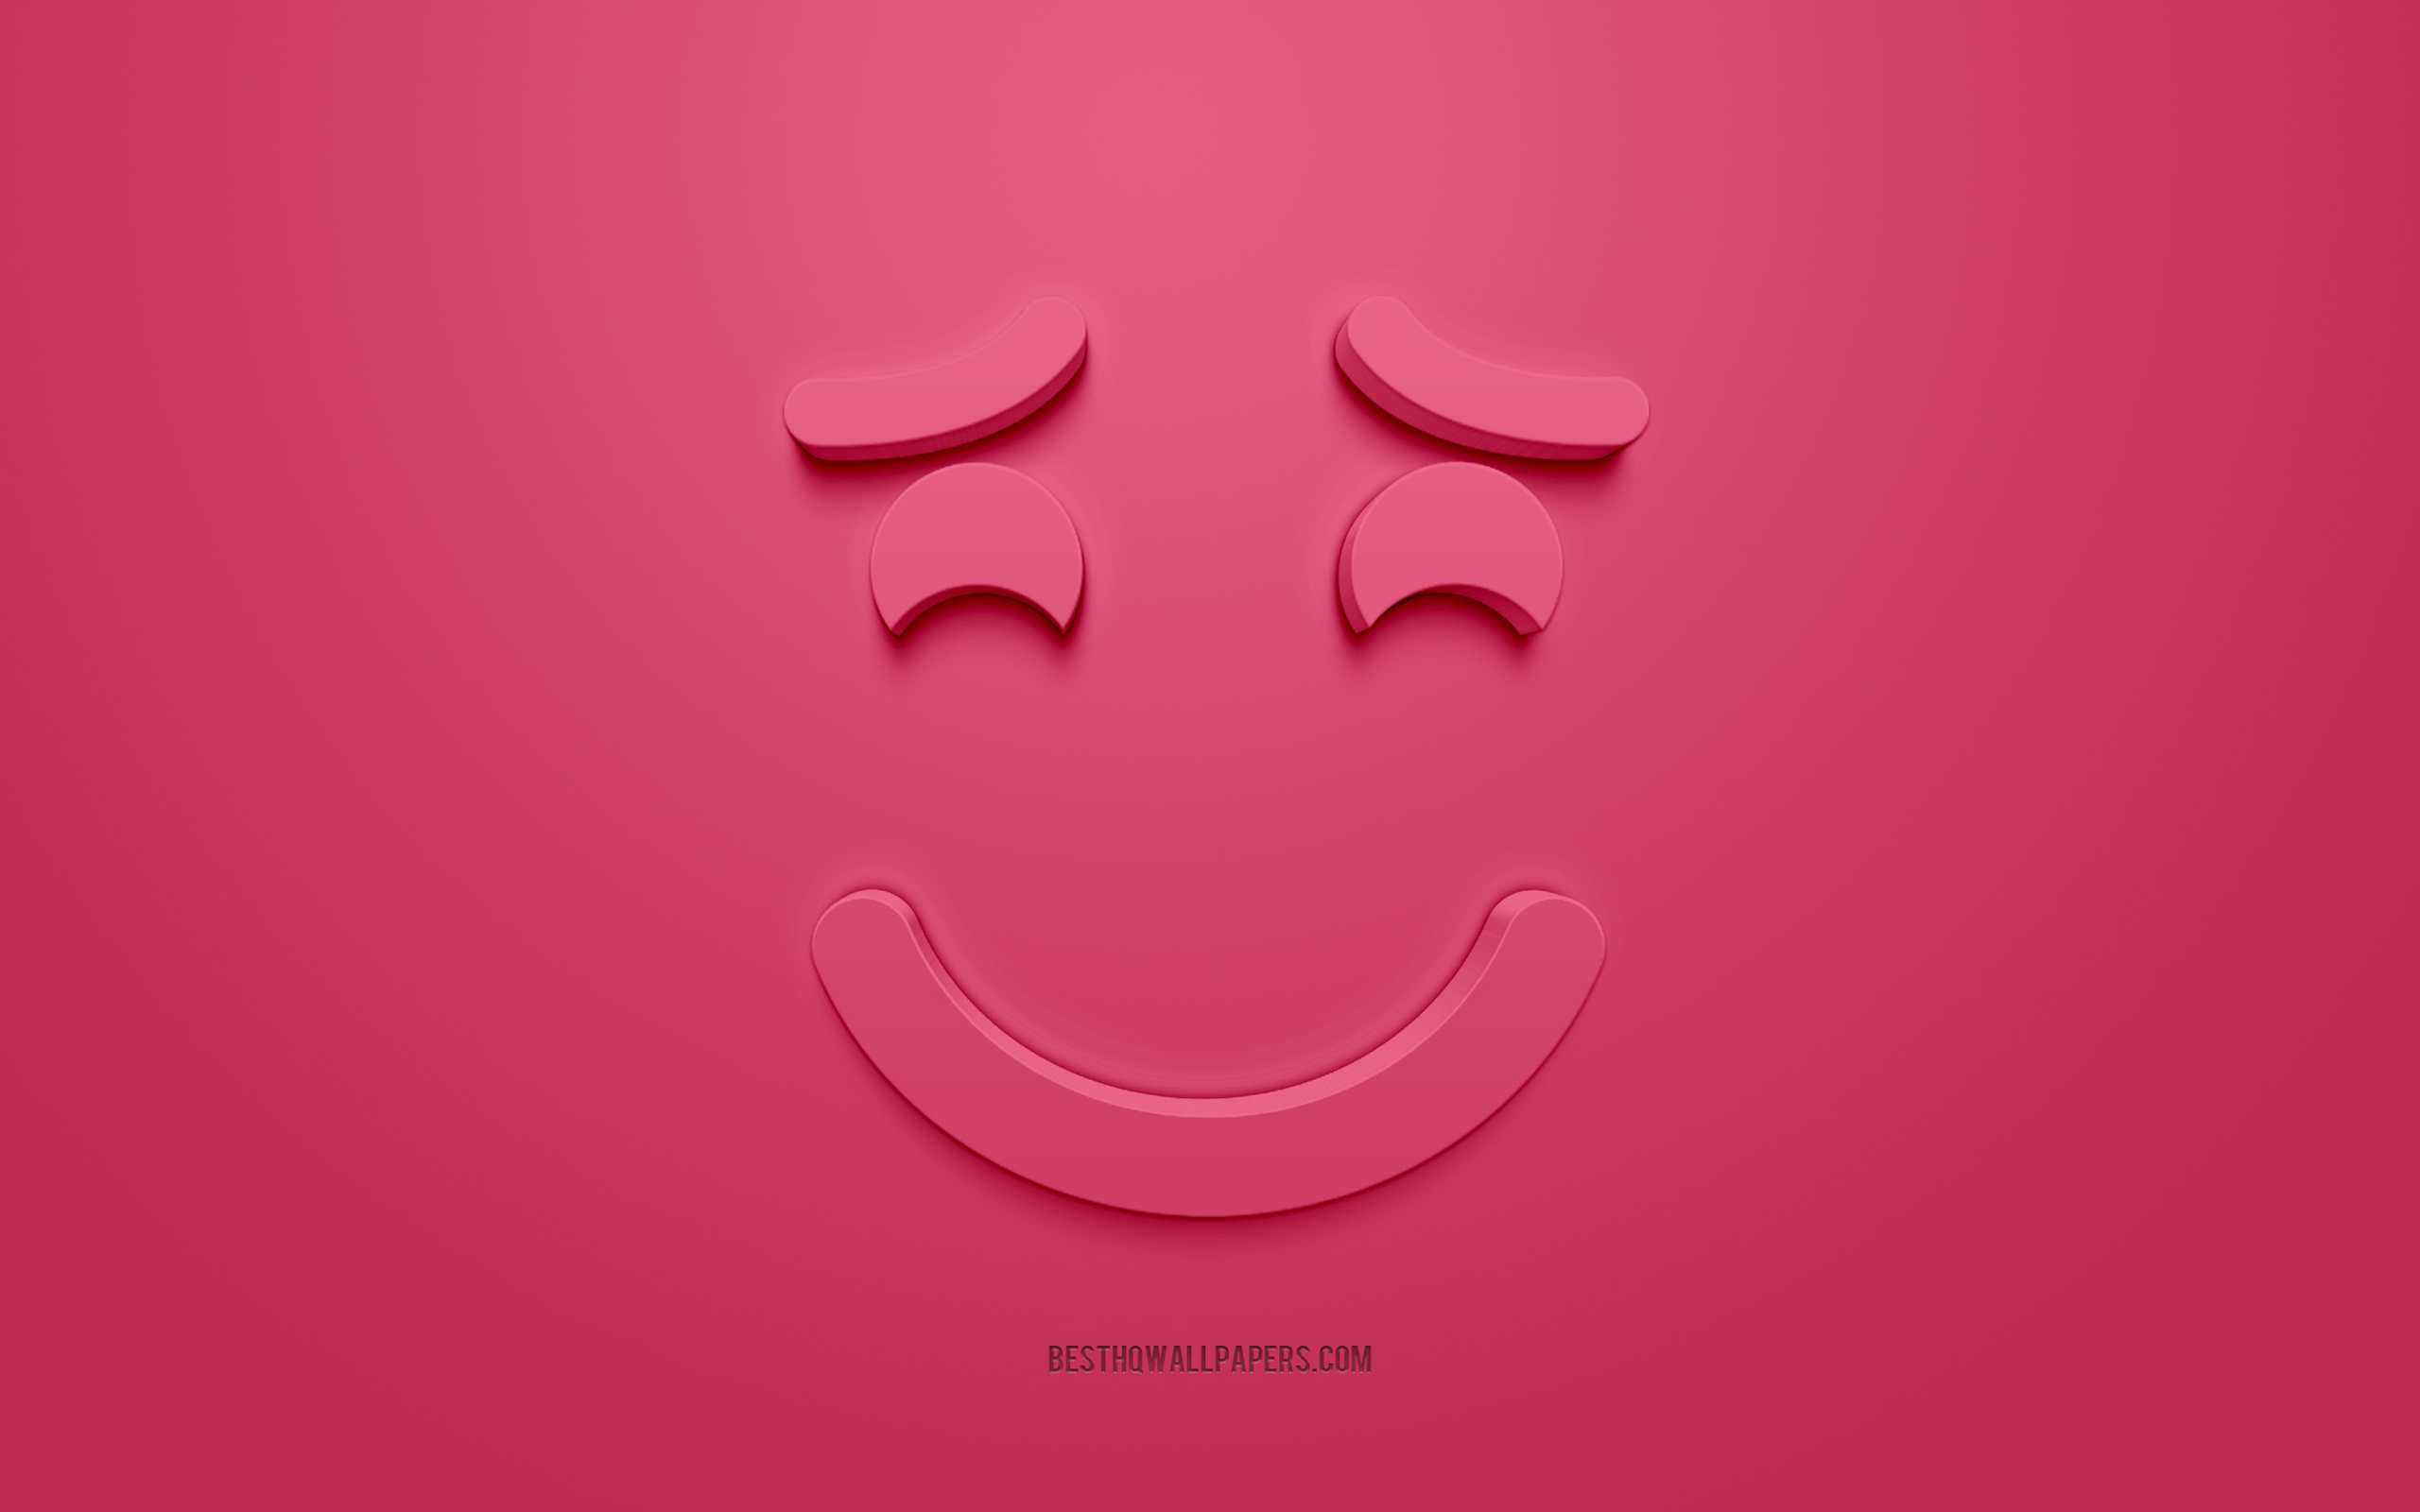 Smiling Emoticon With Raised Eyebrows, 3d Smiley, Shy - Smiley Face Smiley  3d - 2560x1600 Wallpaper 